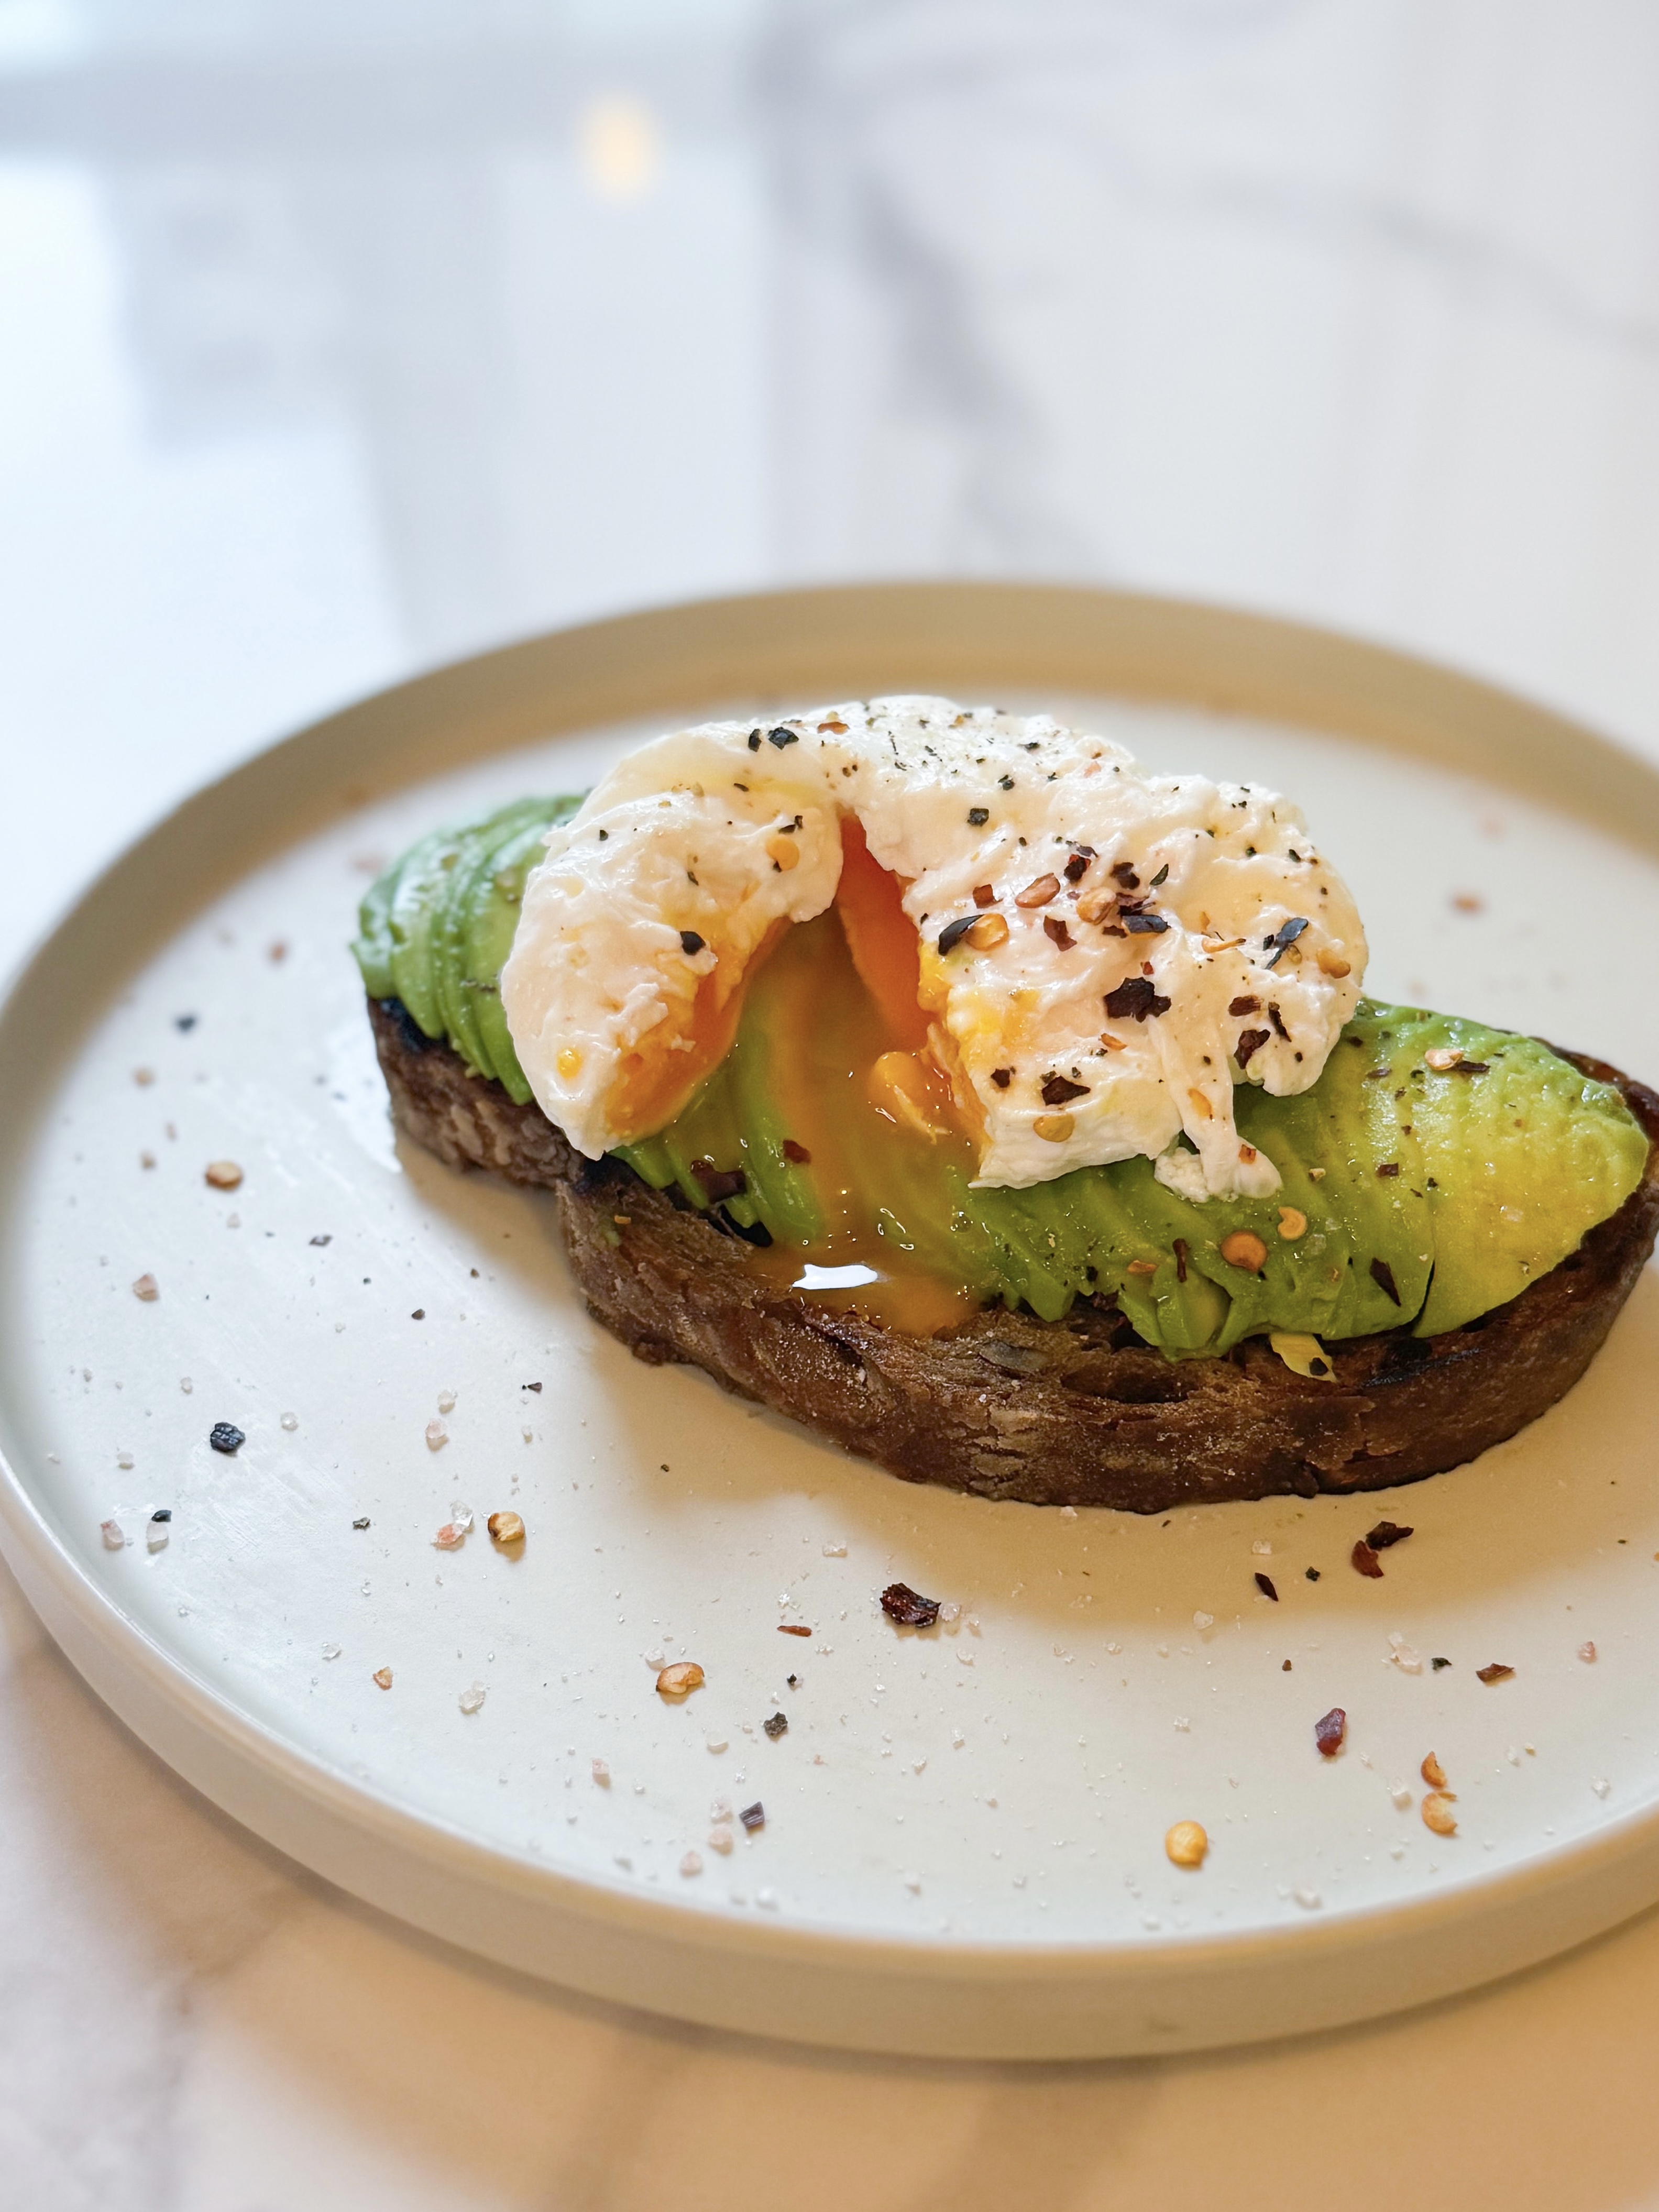 Poached Egg and Avocado on Toast